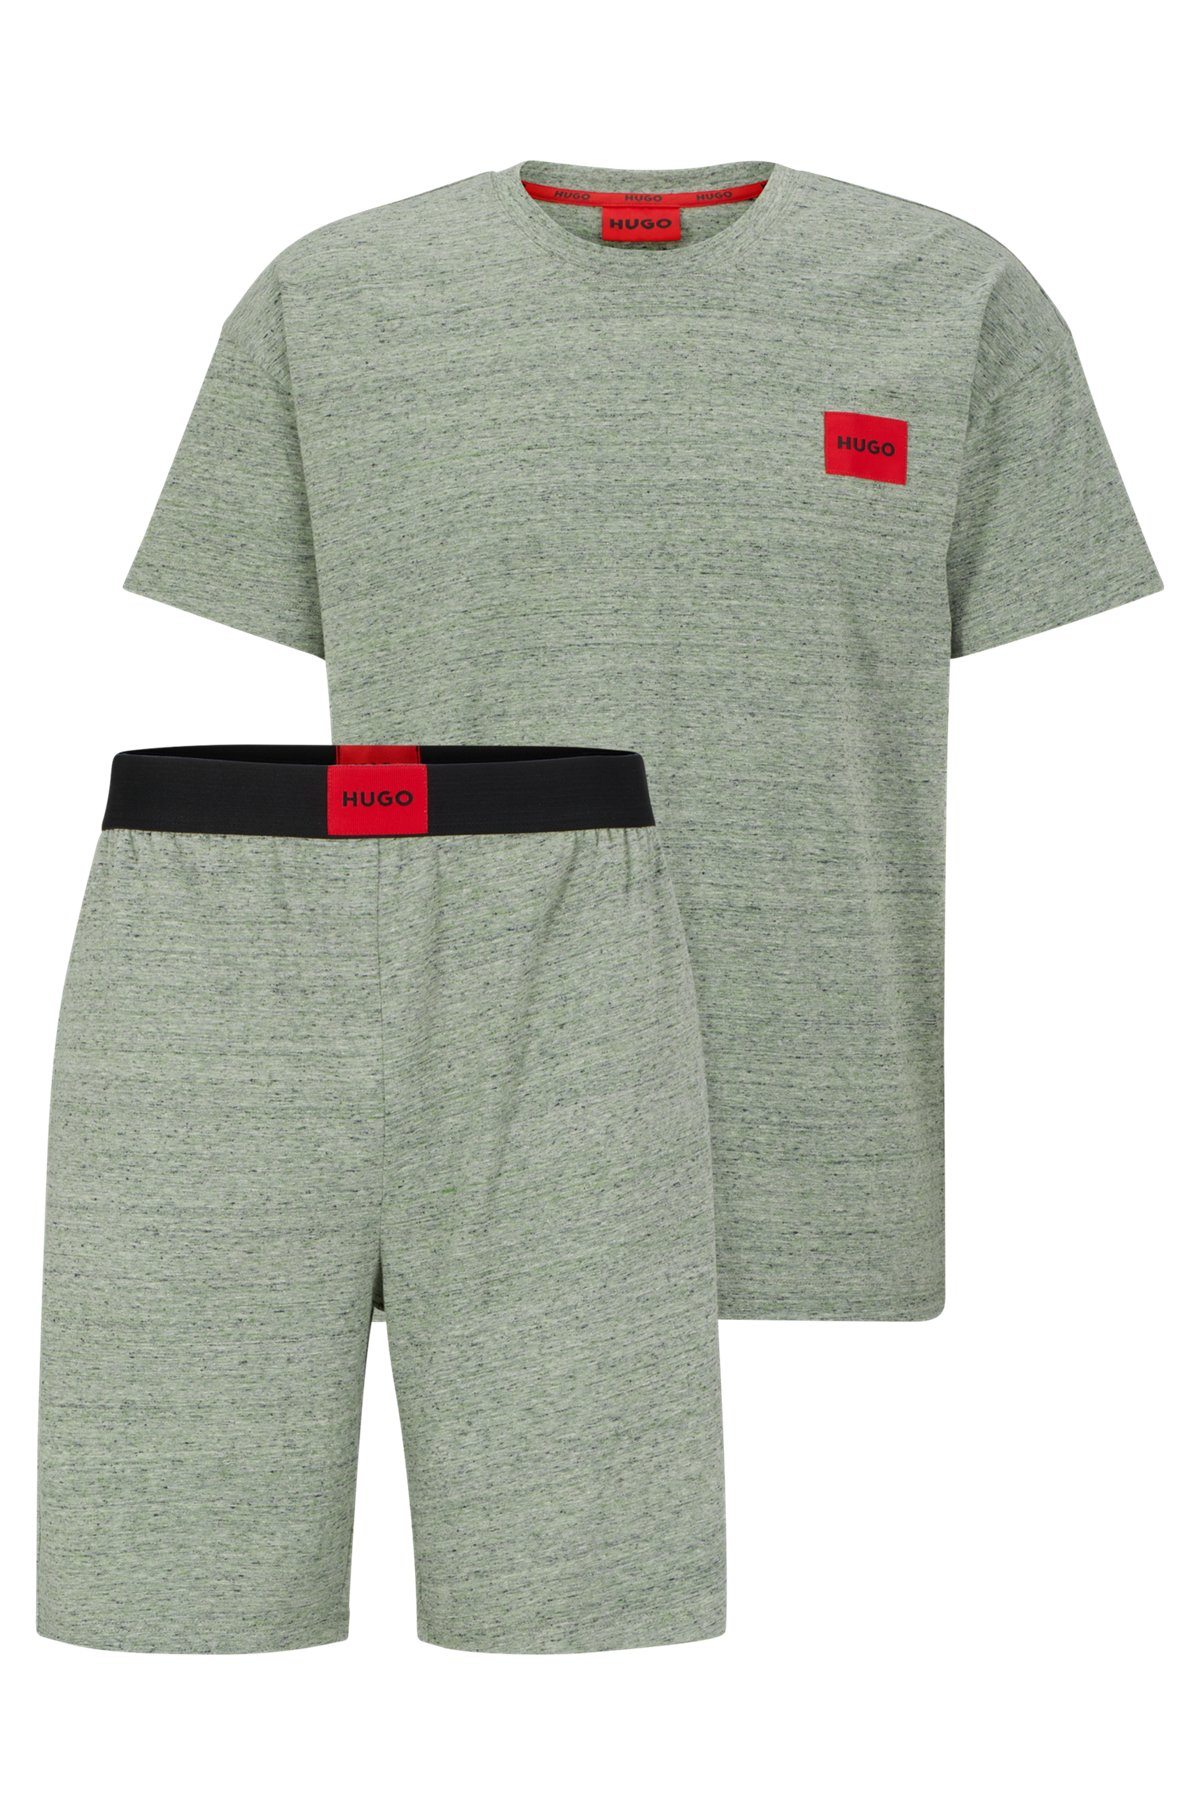 Relaxed-fit cotton-blend pyjamas with red logo label, Light Green